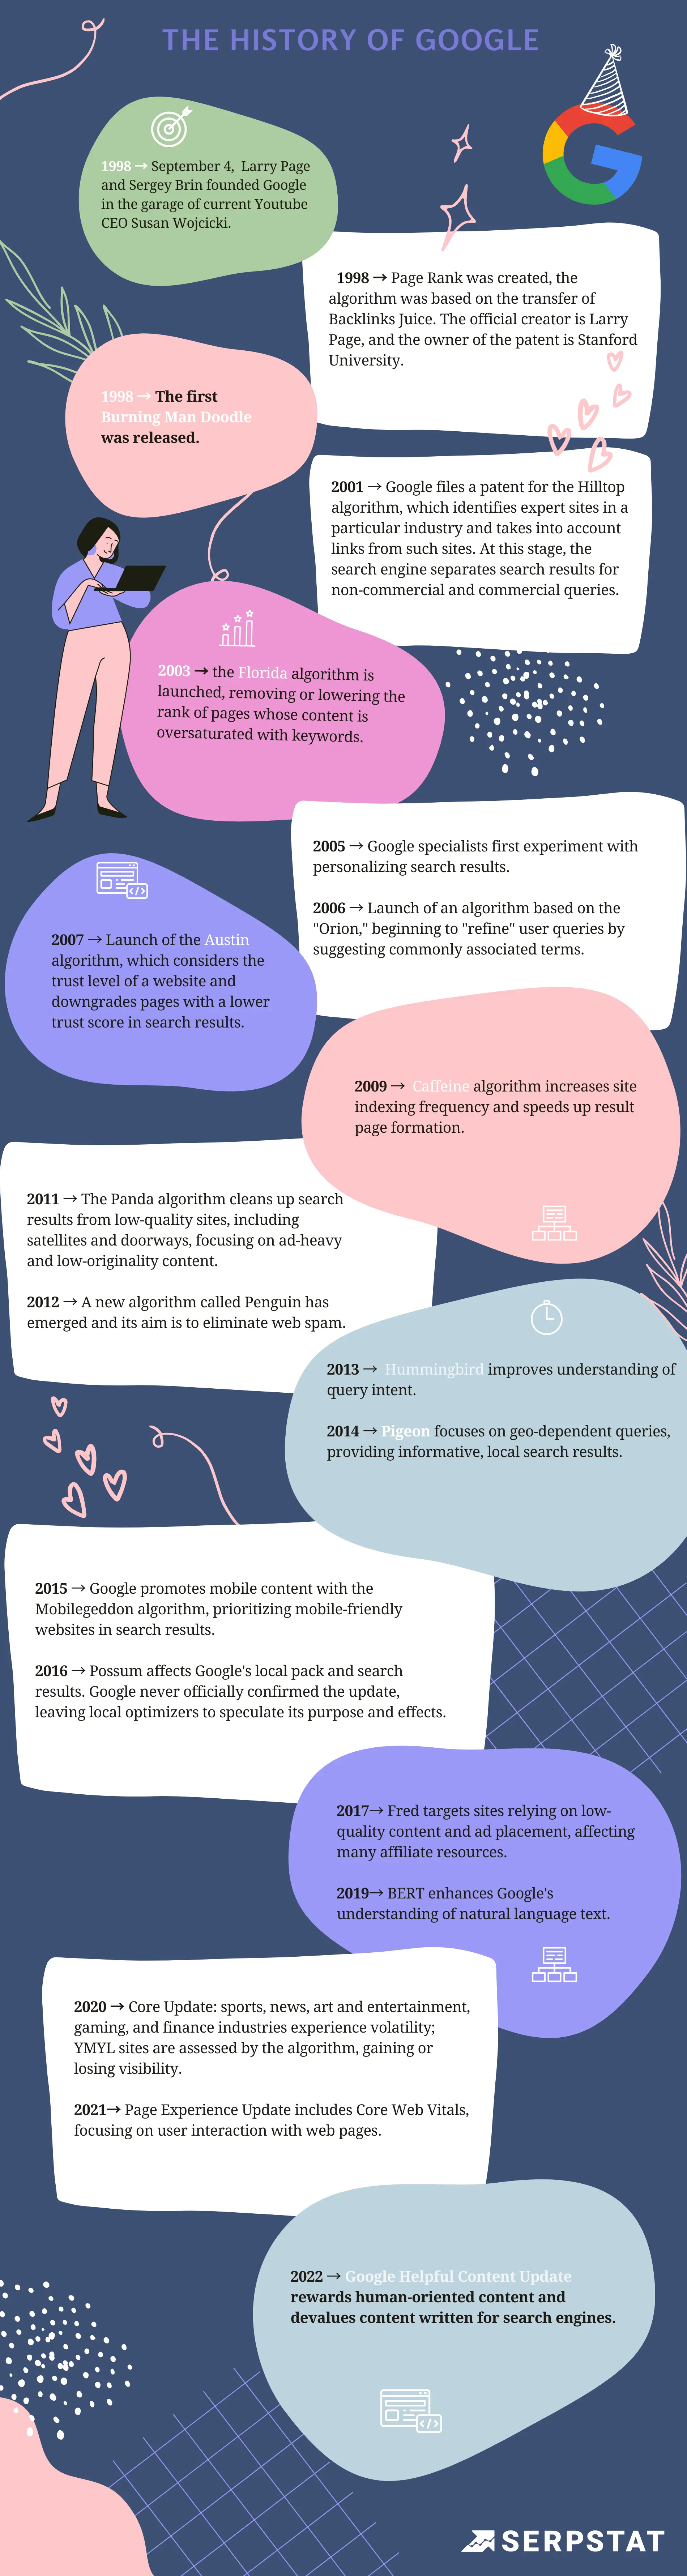 The history of google